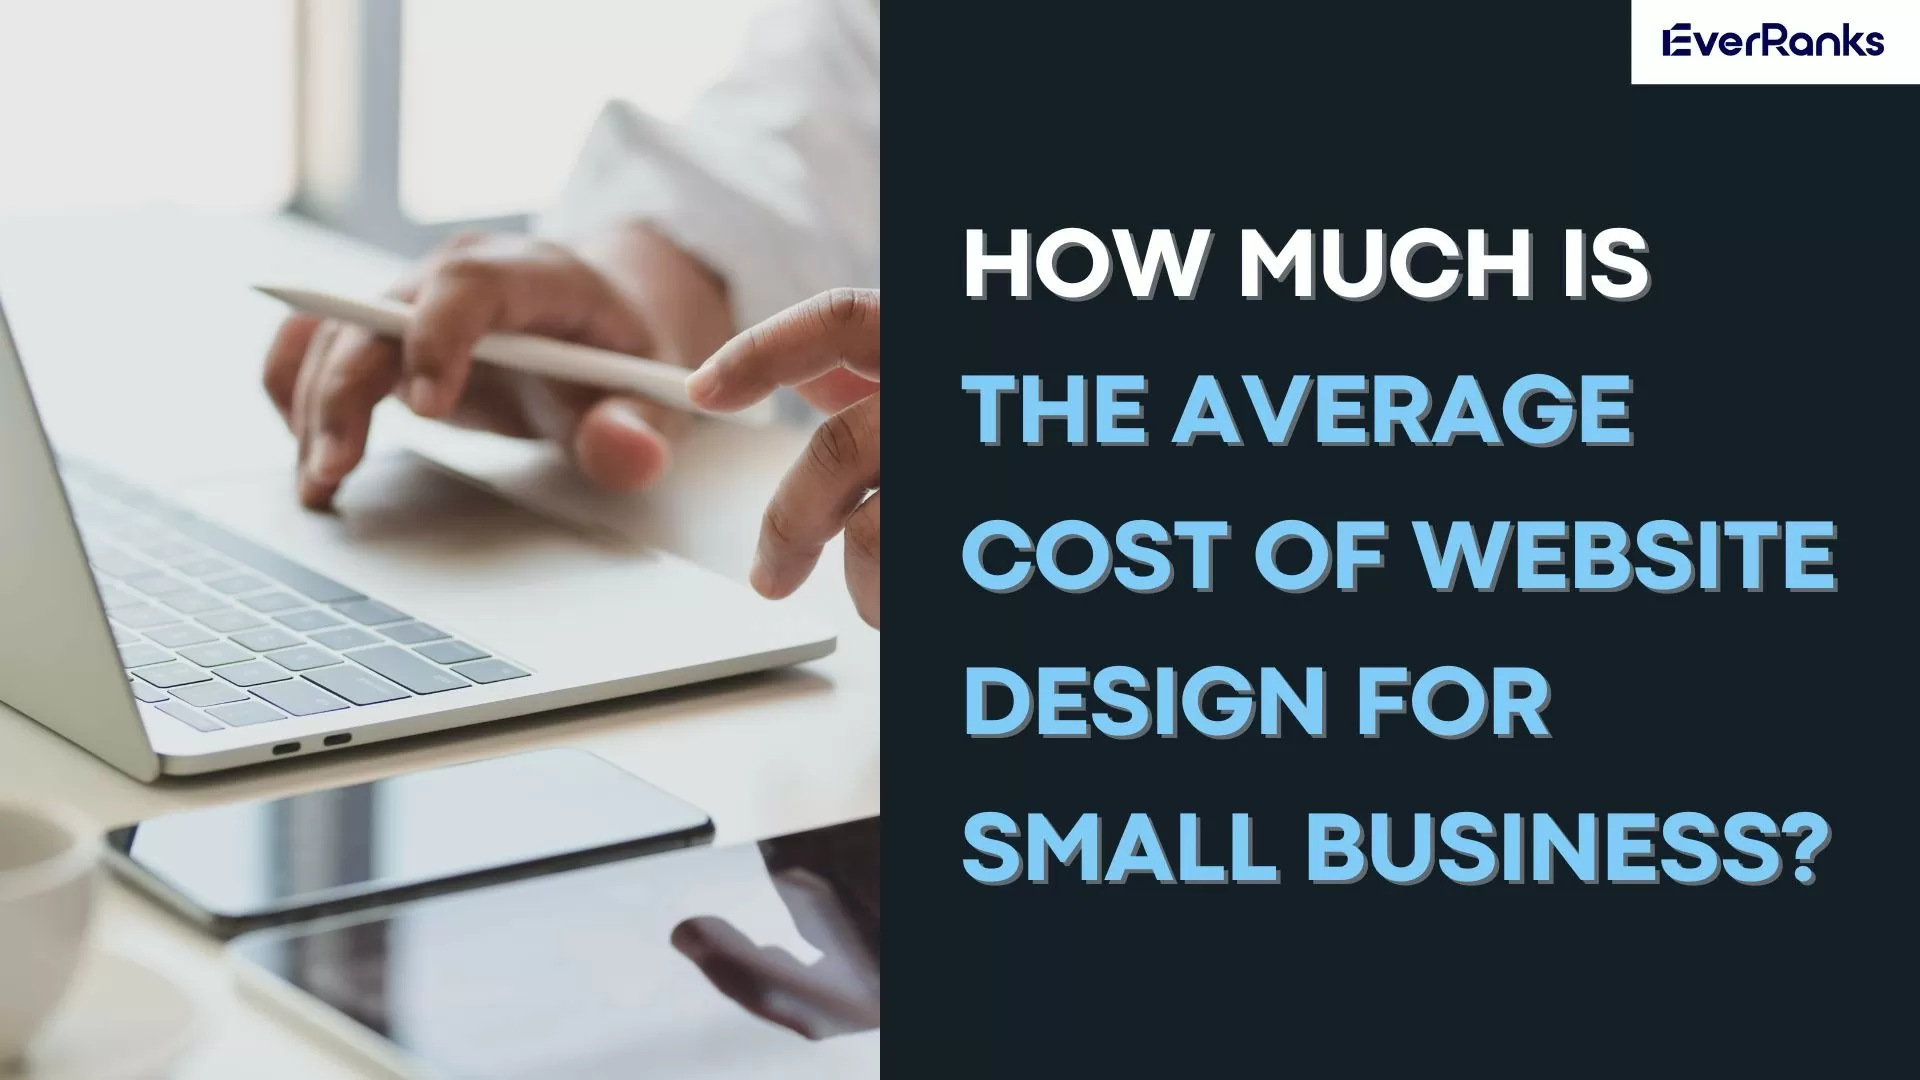 How Much Is The Average Cost Of Website Design For Small Businesses?